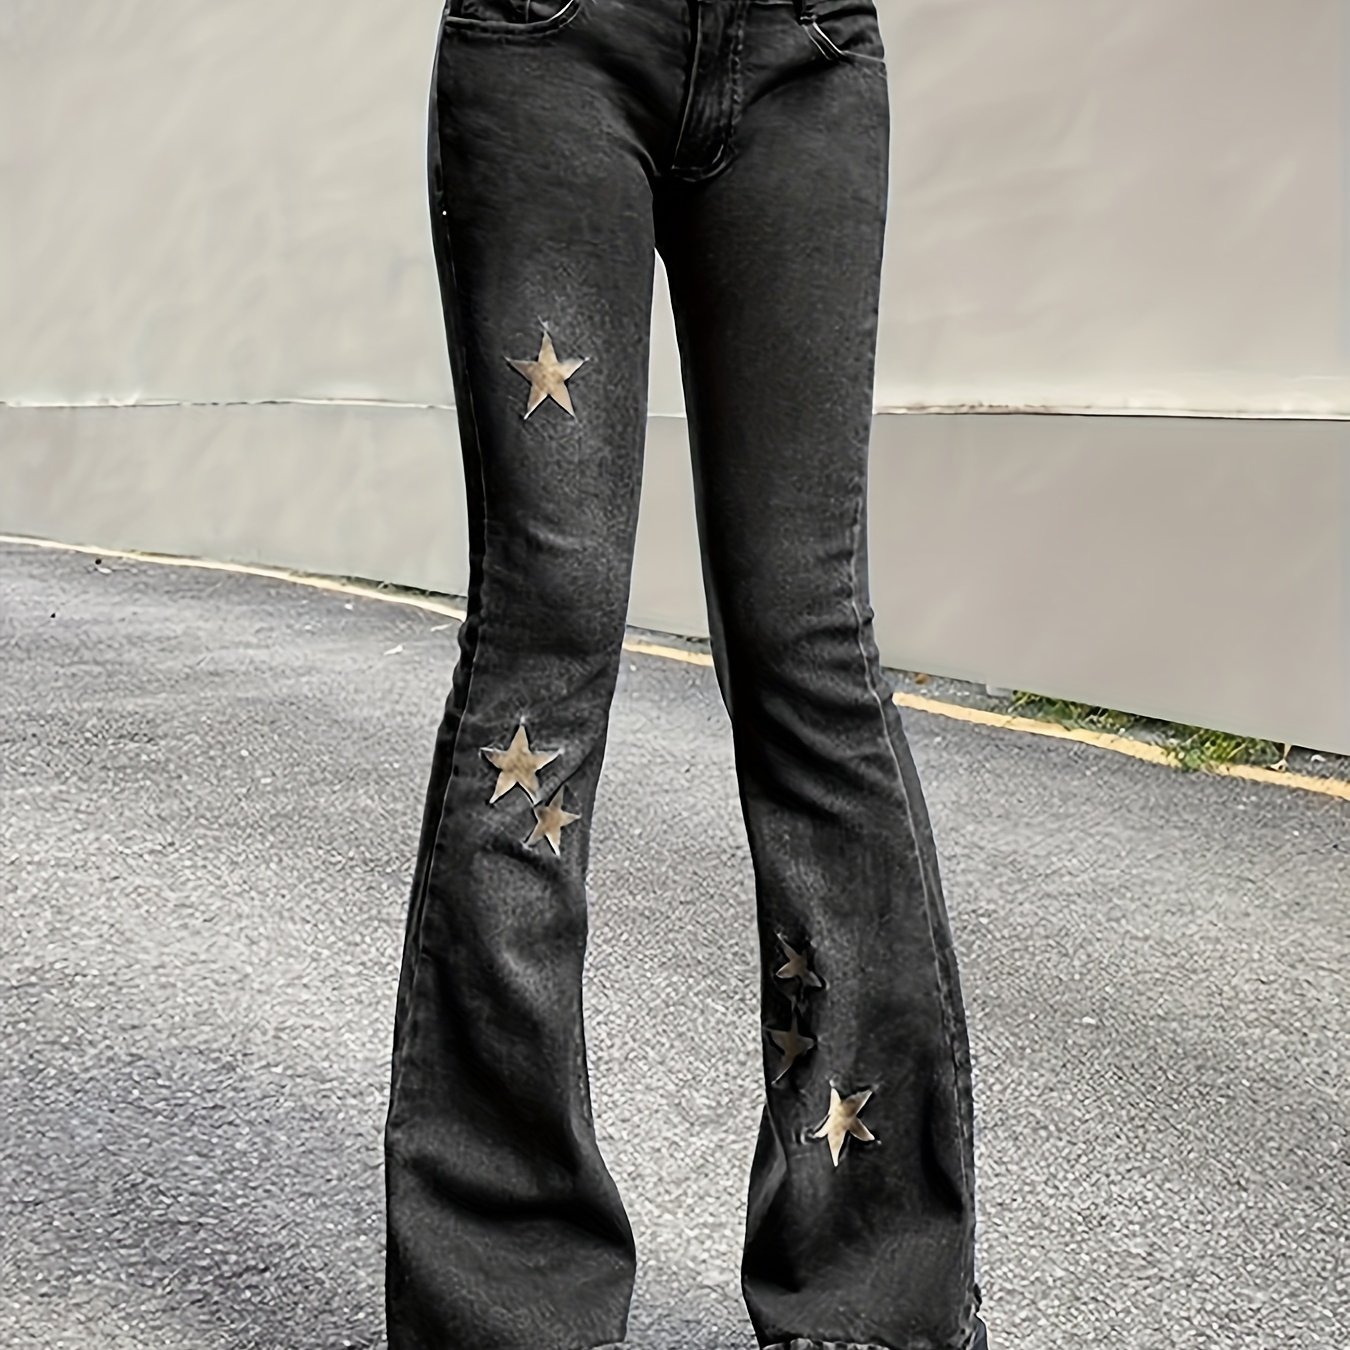 Blue Star Print Flare Jeans, High Stretch Y2K Style Bell Bottom Jeans,  Women's Denim Jeans & Clothing - Perfect For Carnaval Music Festival